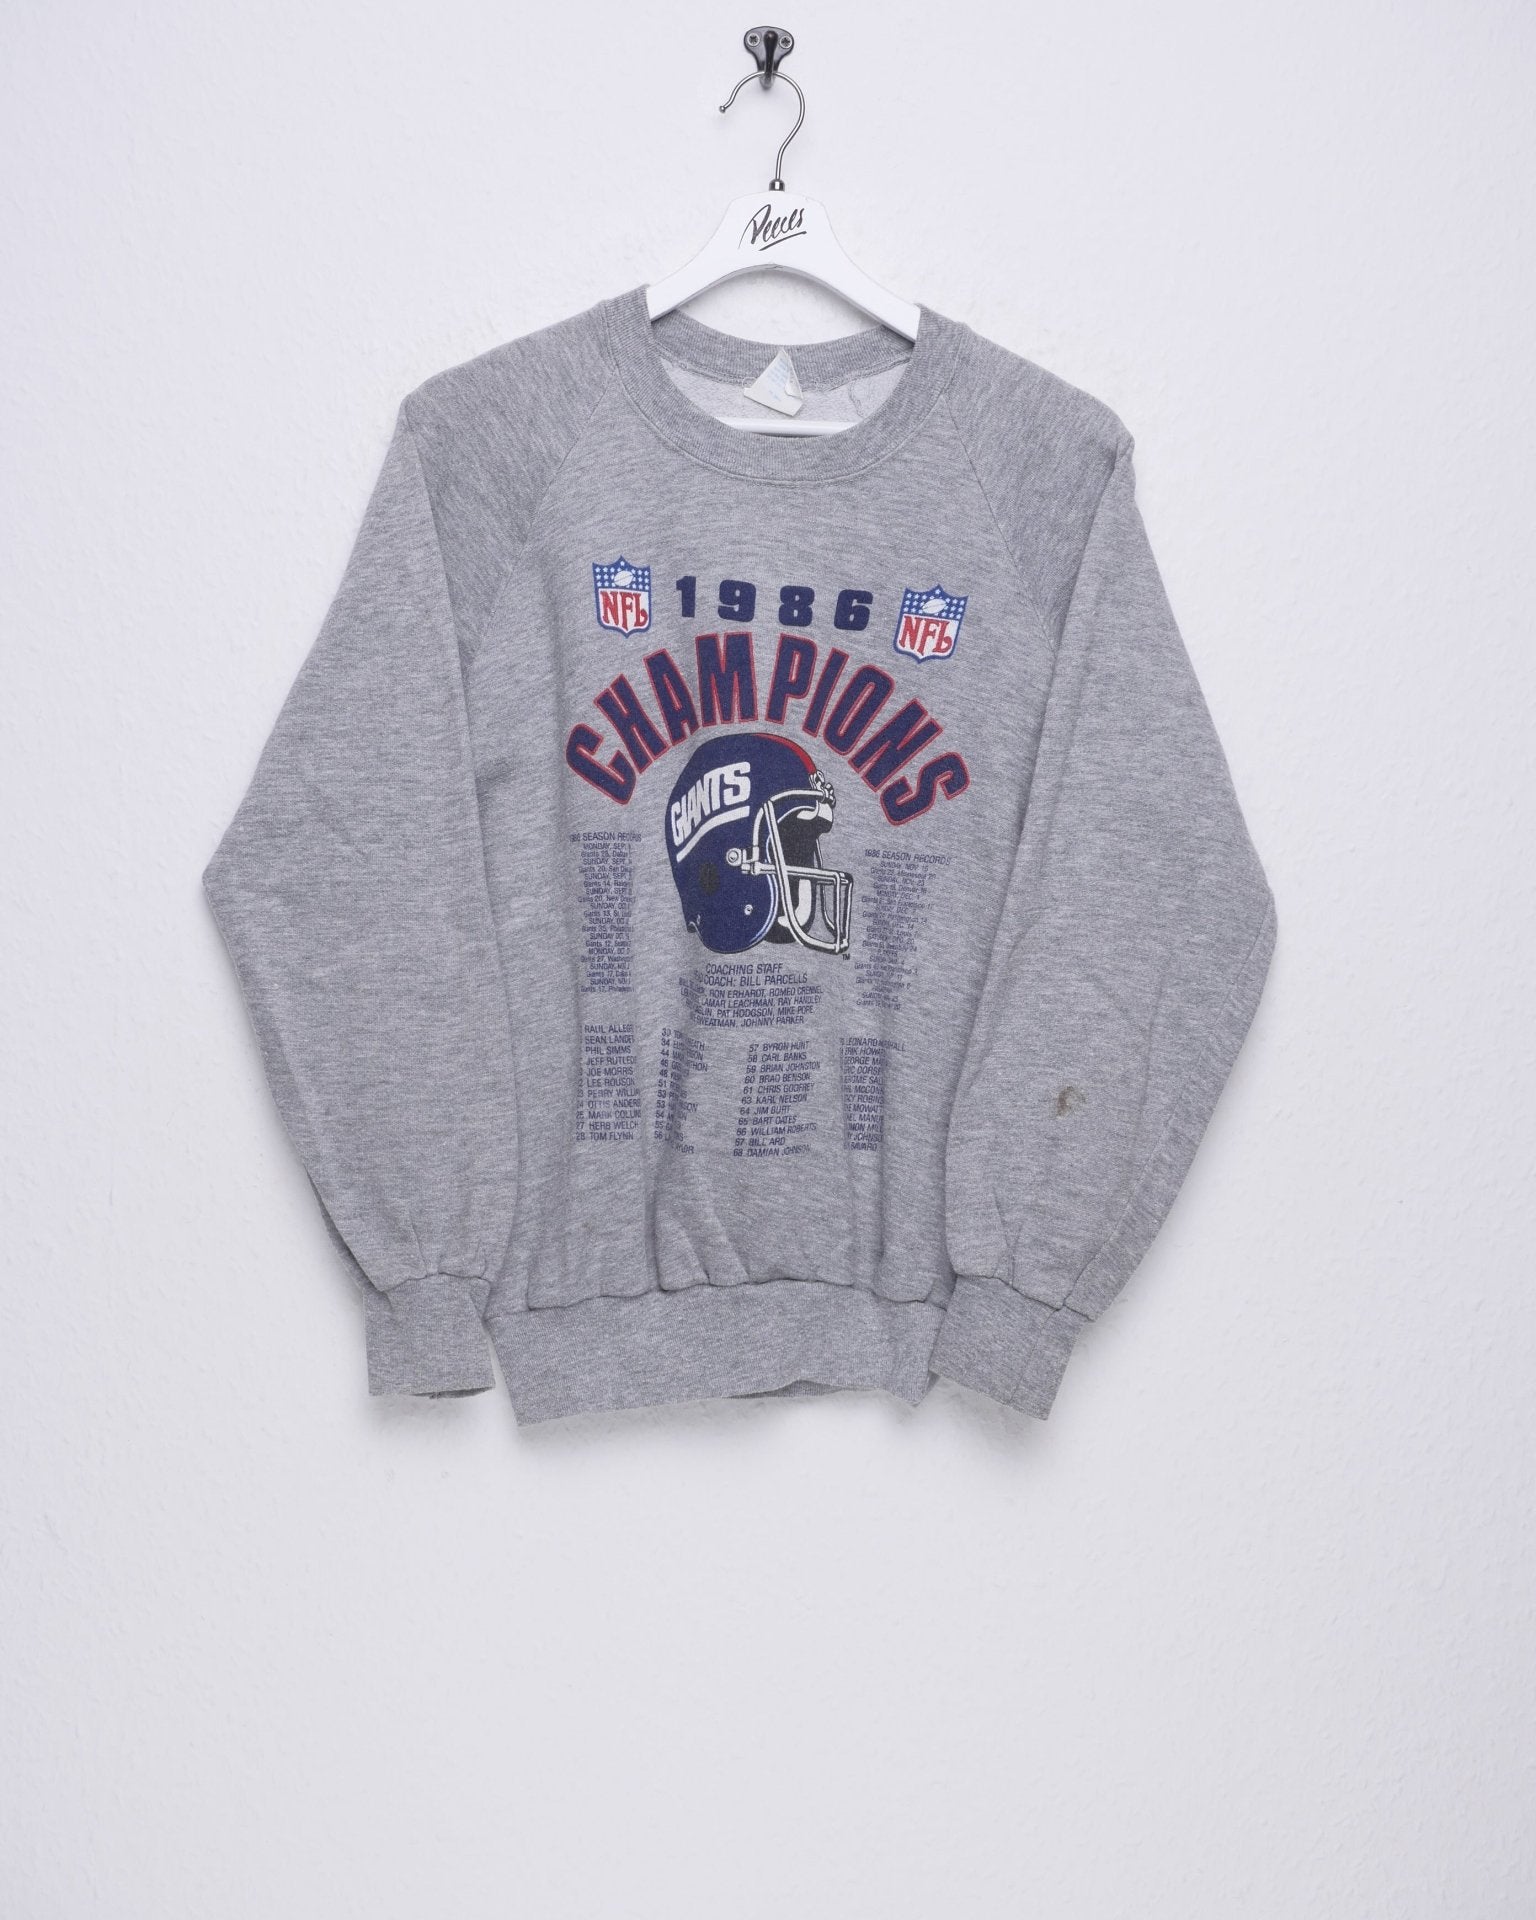 Anvil NFL Champions 1986 Giants printed Graphic grey Sweater - Peeces